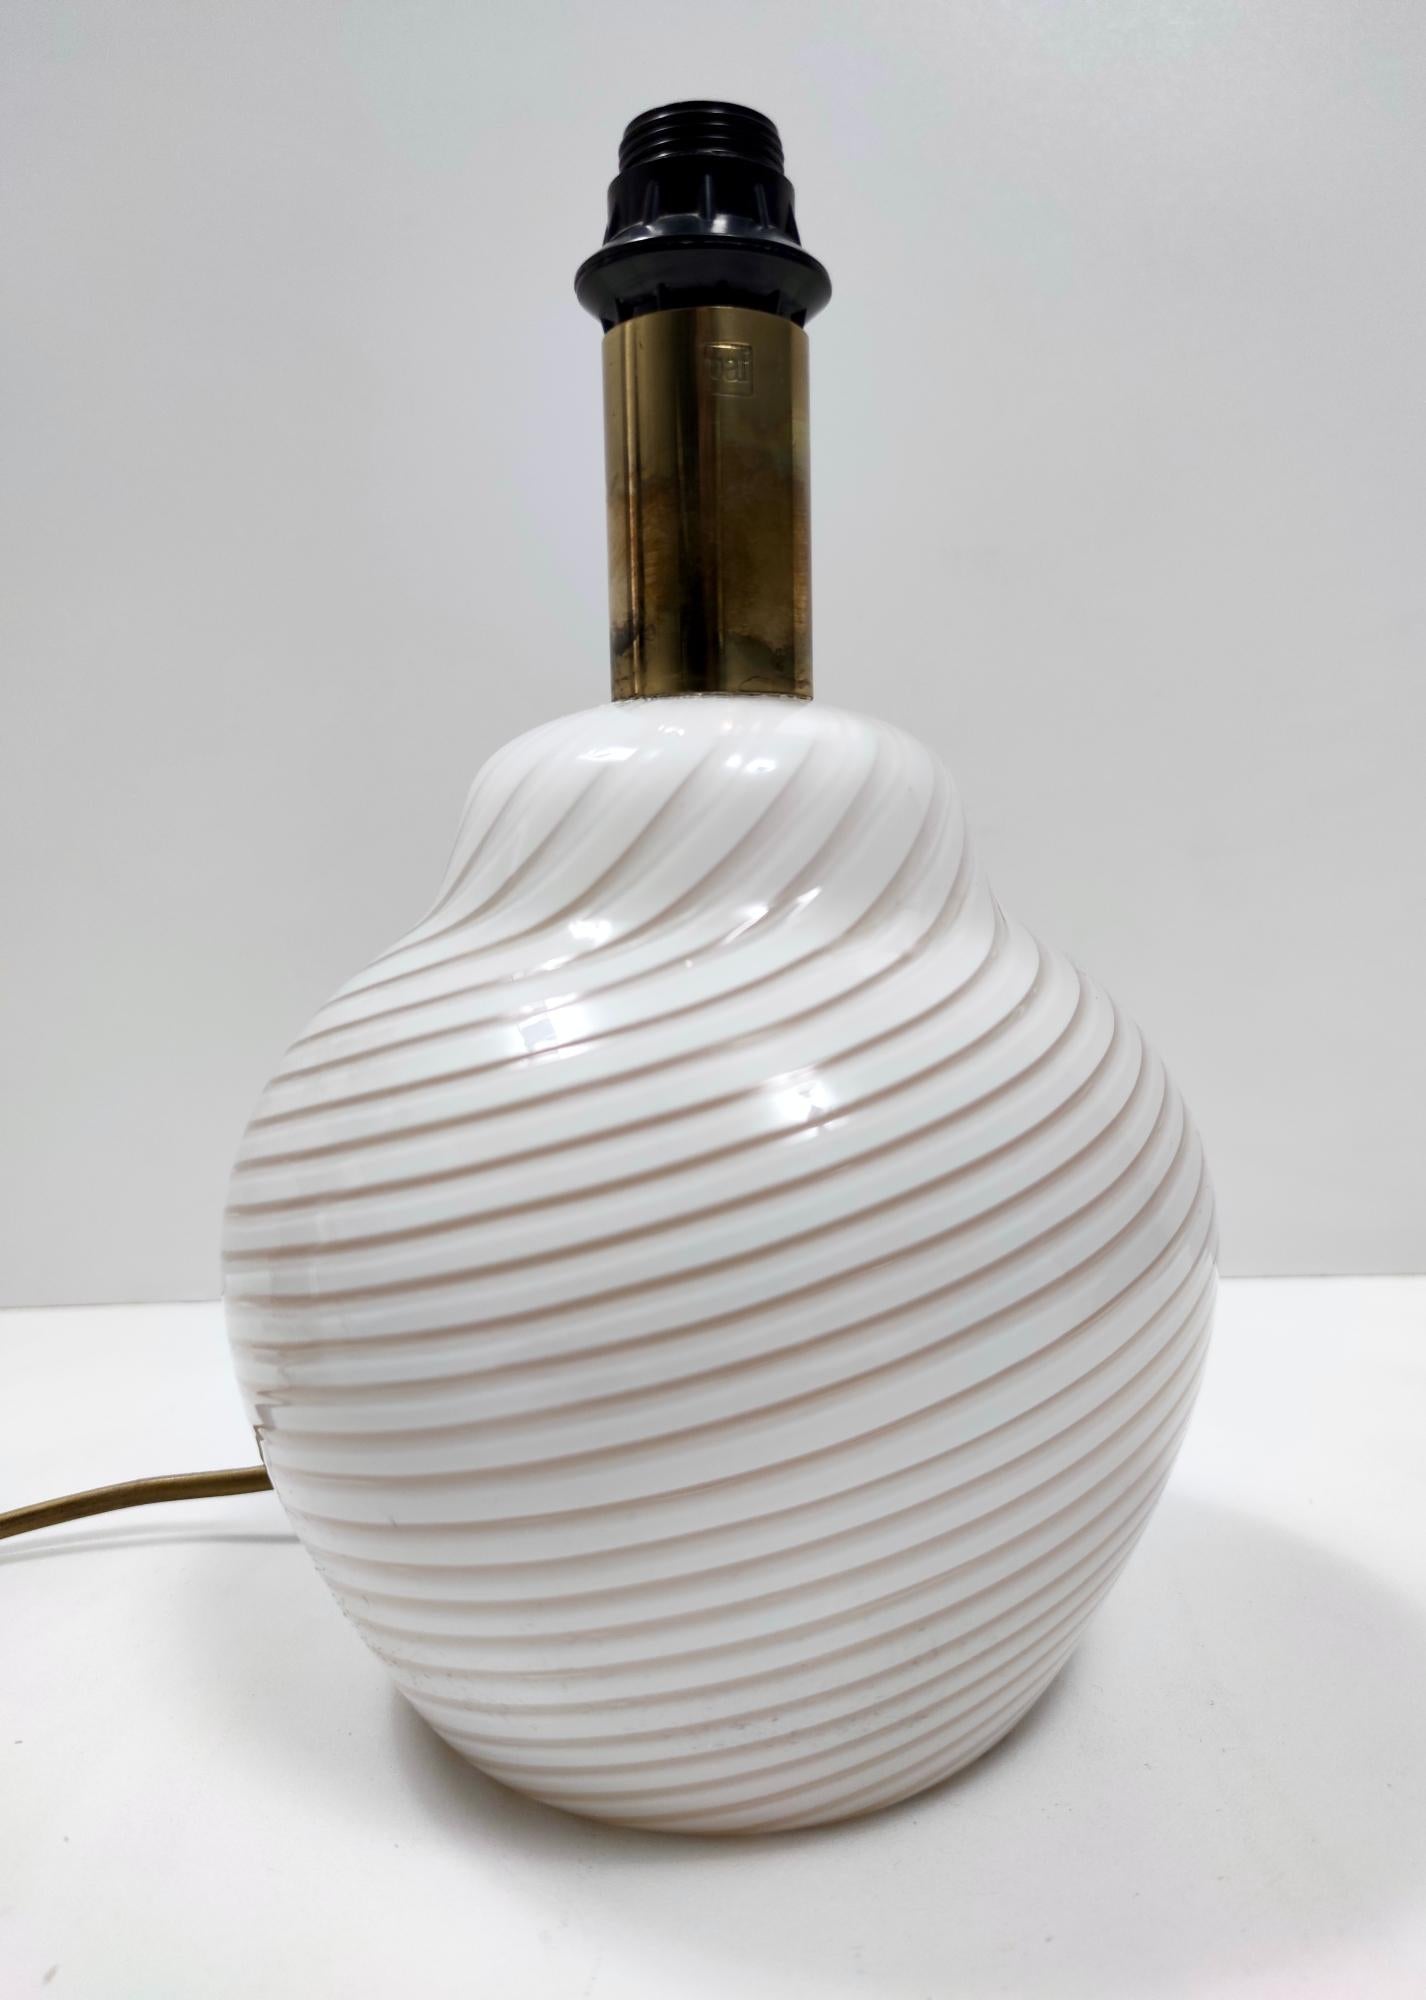 Post-Modern Murano Glass Table Lamp by Lino Tagliapietra Produced by Paf, Italy, 1980s For Sale